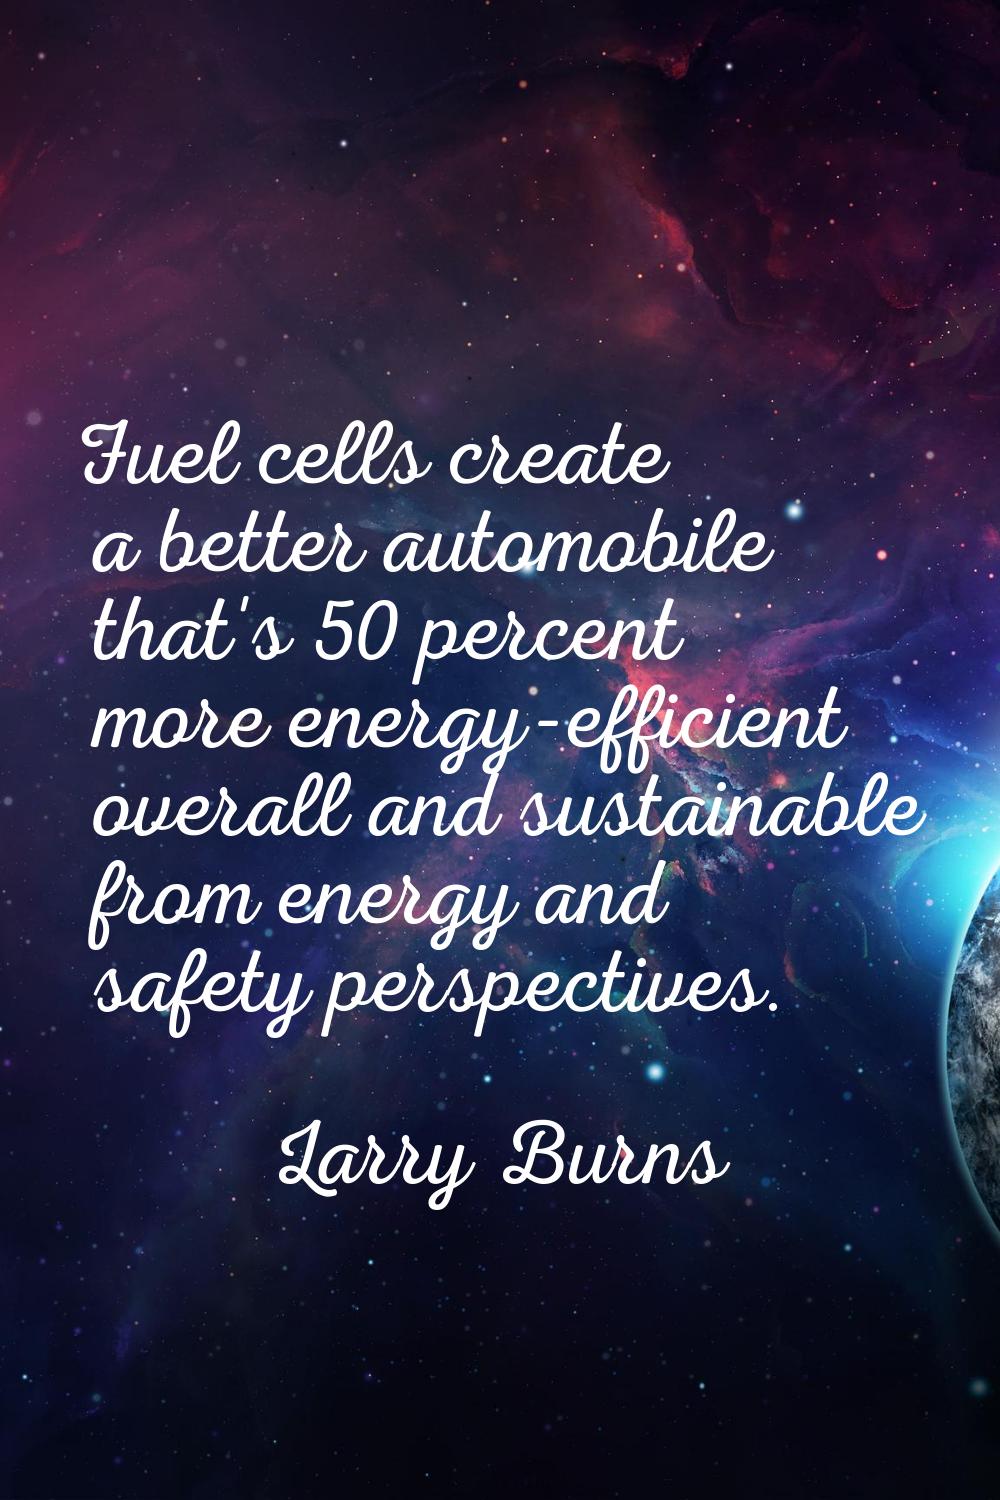 Fuel cells create a better automobile that's 50 percent more energy-efficient overall and sustainab